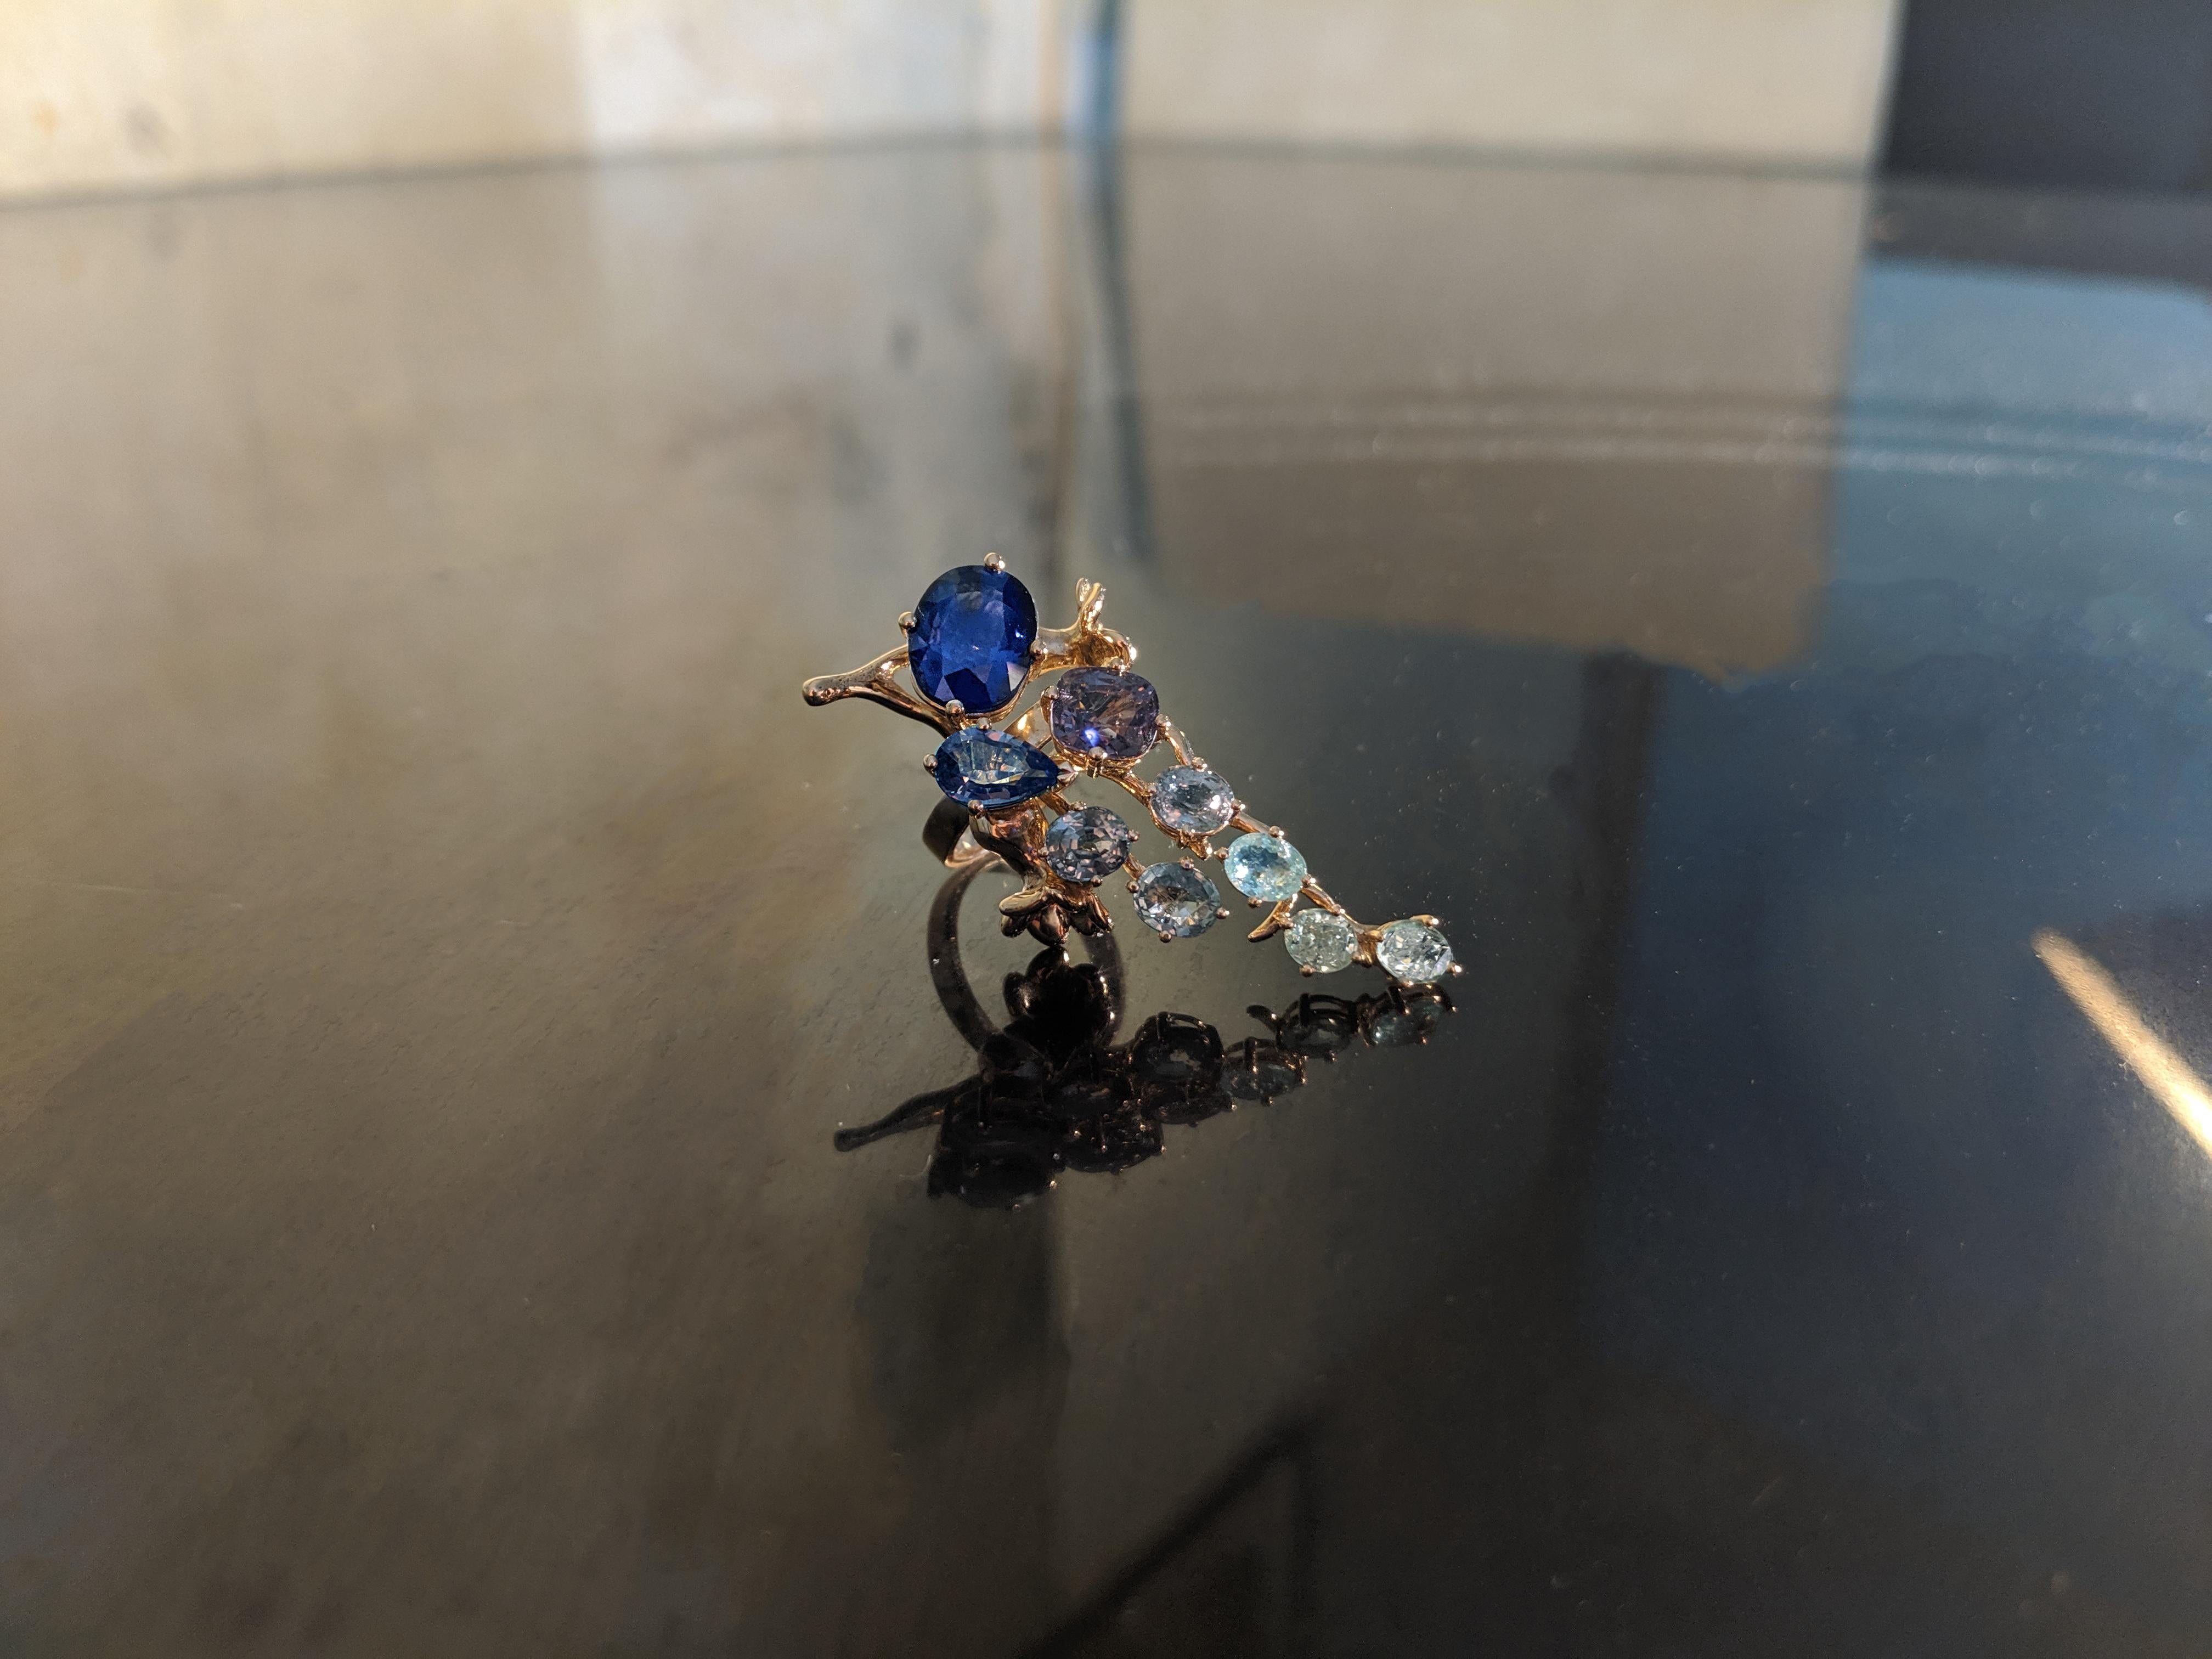 The center of this 18 karat yellow gold Tobacco Flower Engagement Ring is a GRS certified 5.23 carat vivid royal blue oval sapphire from Sri Lanka, a very precious gem that can only be set in such a delicate design. The dimensions of the sapphire